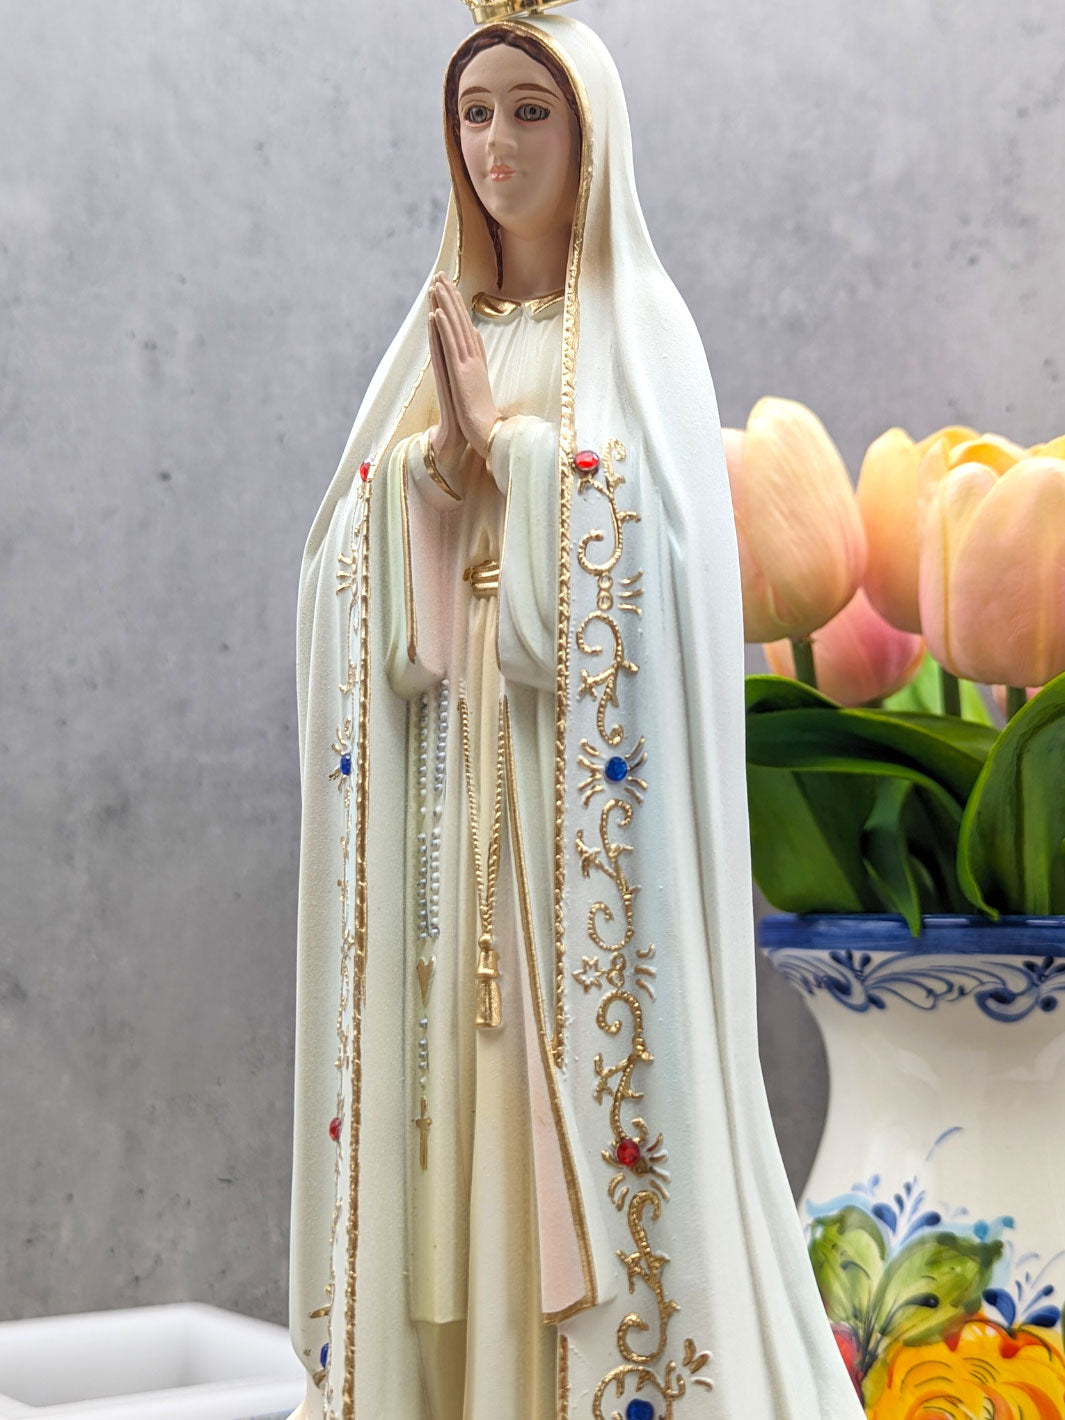 17 Inch Glass Eyes Our Lady of Fatima Statue Made in Portugal